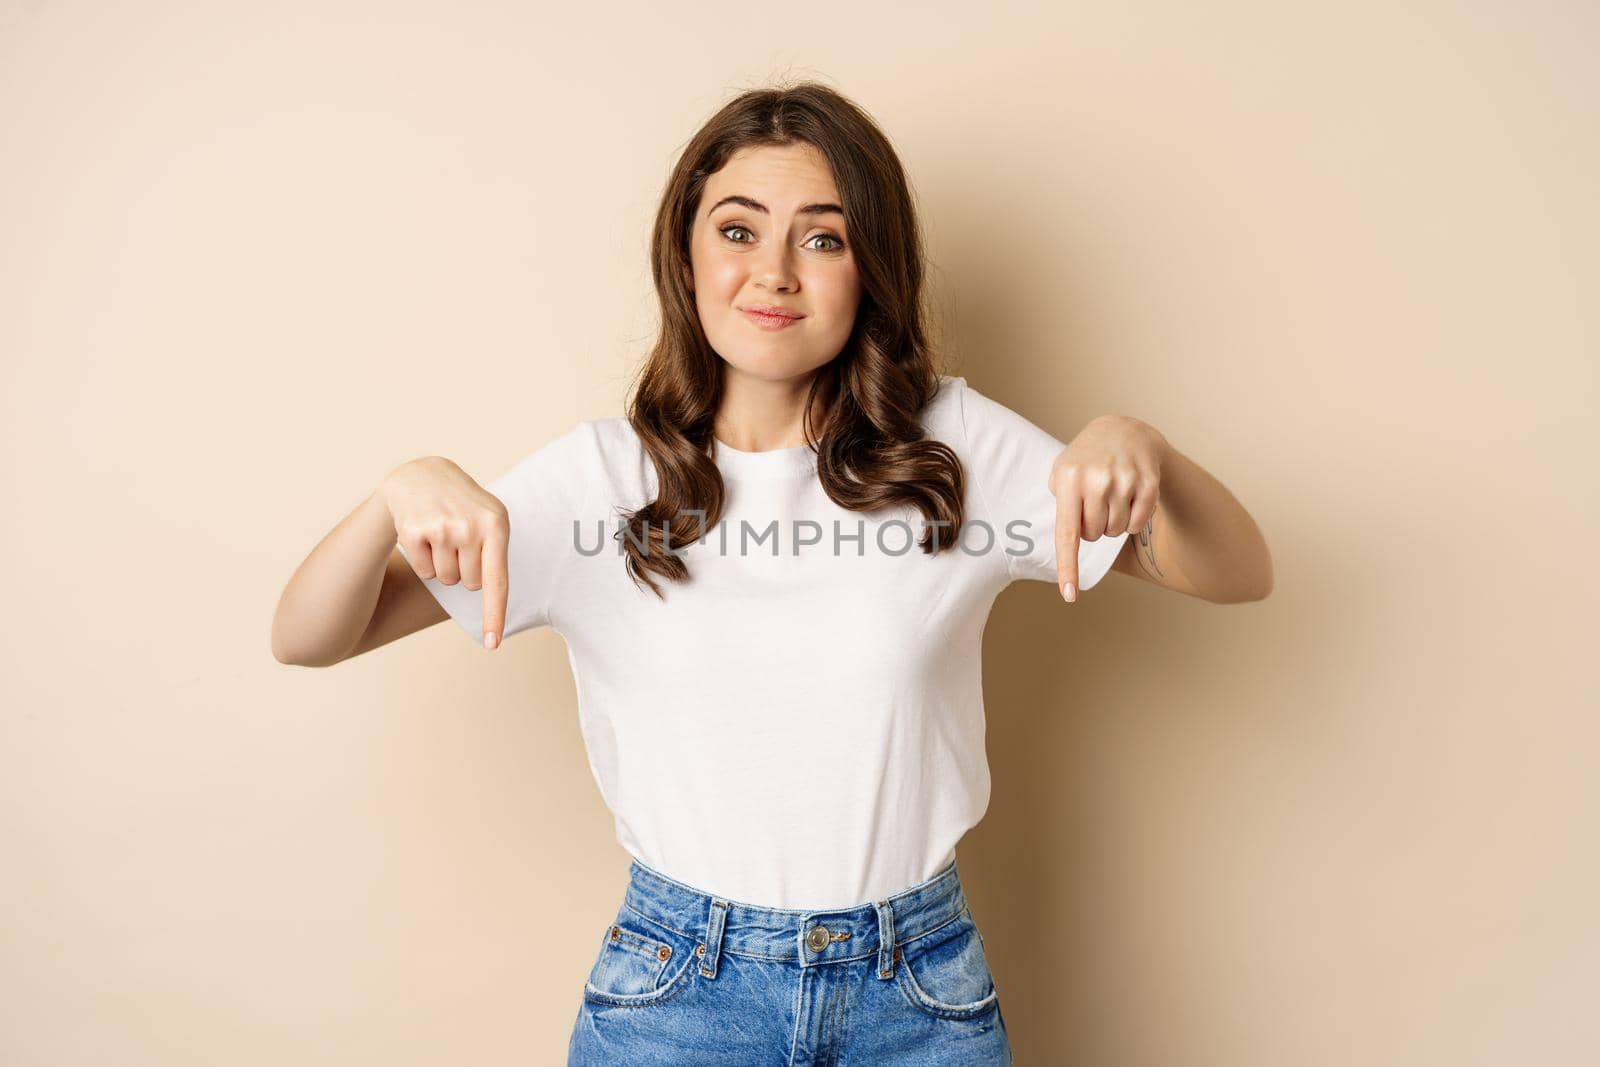 Doubtful girl pointing fingers down and smirking, looking uncomfortable while complaining, dislike smth, standing over beige background.